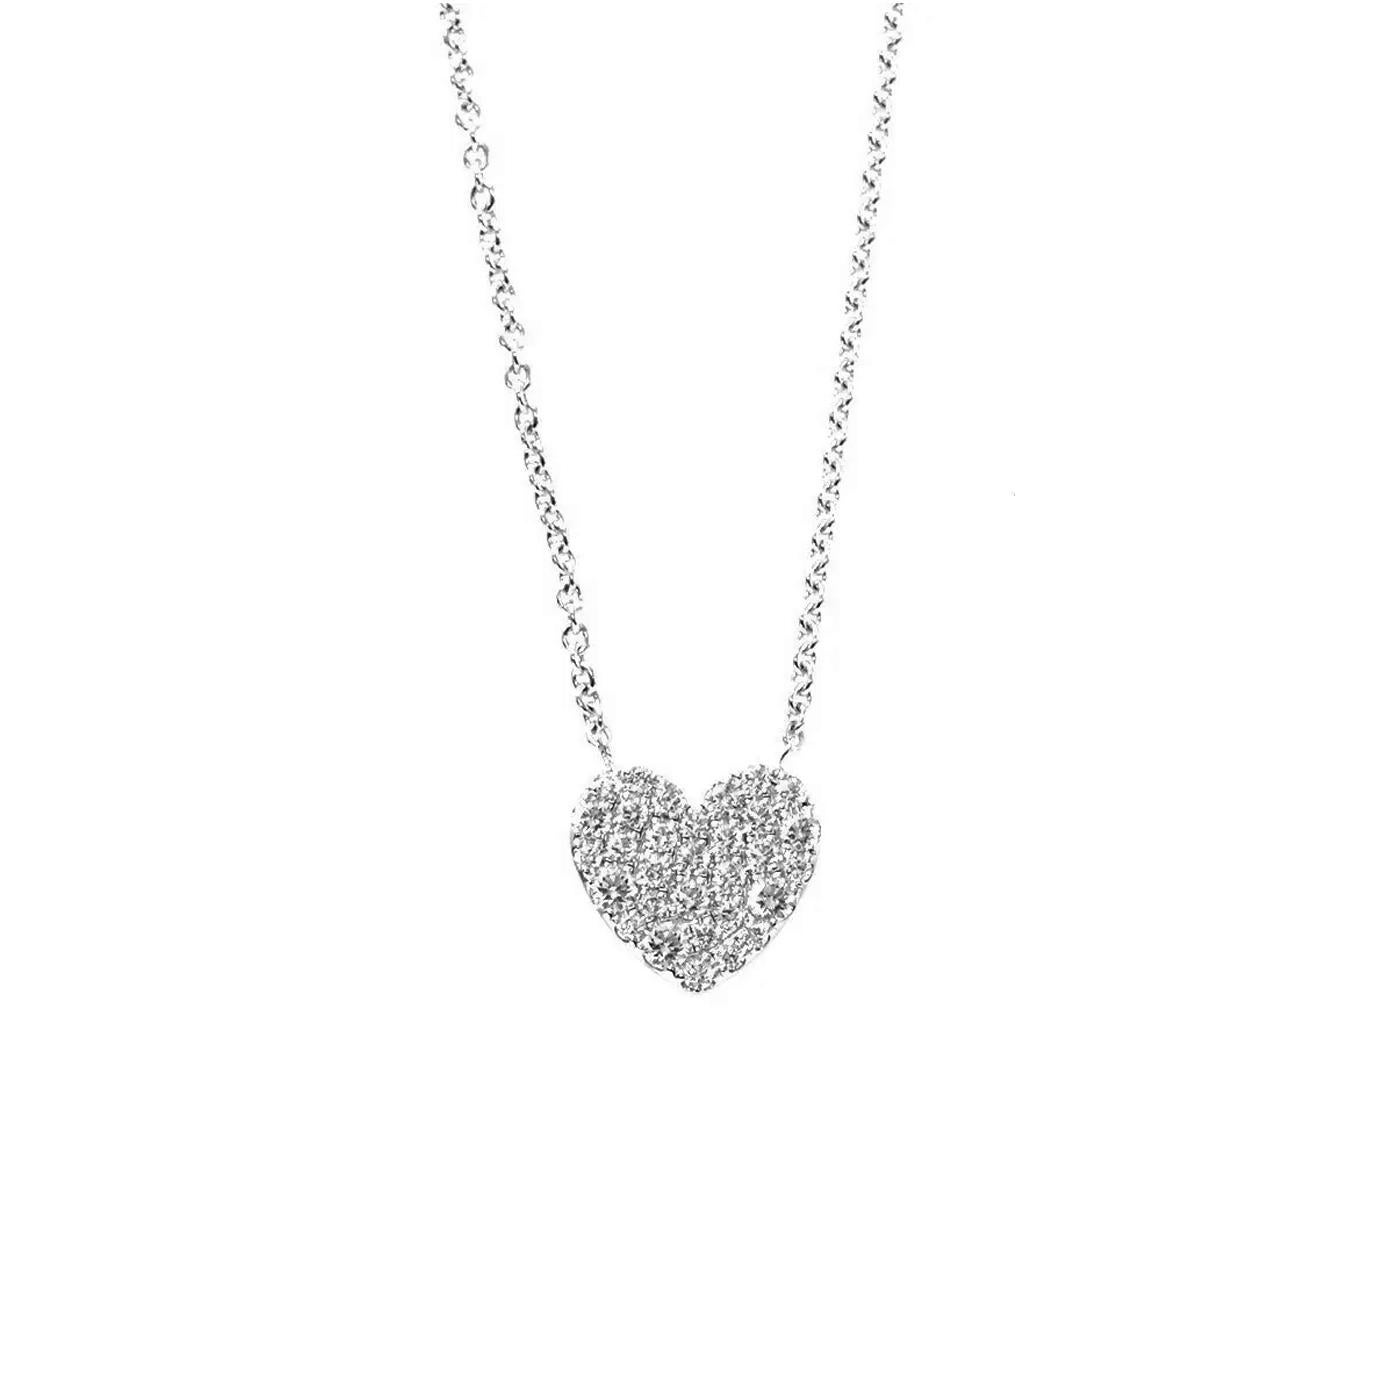 Tiffany & Co. 90187420 metro heart pave diamond pendant. This design celebrates the spirit of love. Shimmering diamonds accentuate the elegant curves of this pendant. Crafted in 18k white gold with pave set round brilliant cut diamonds Engraved: 750